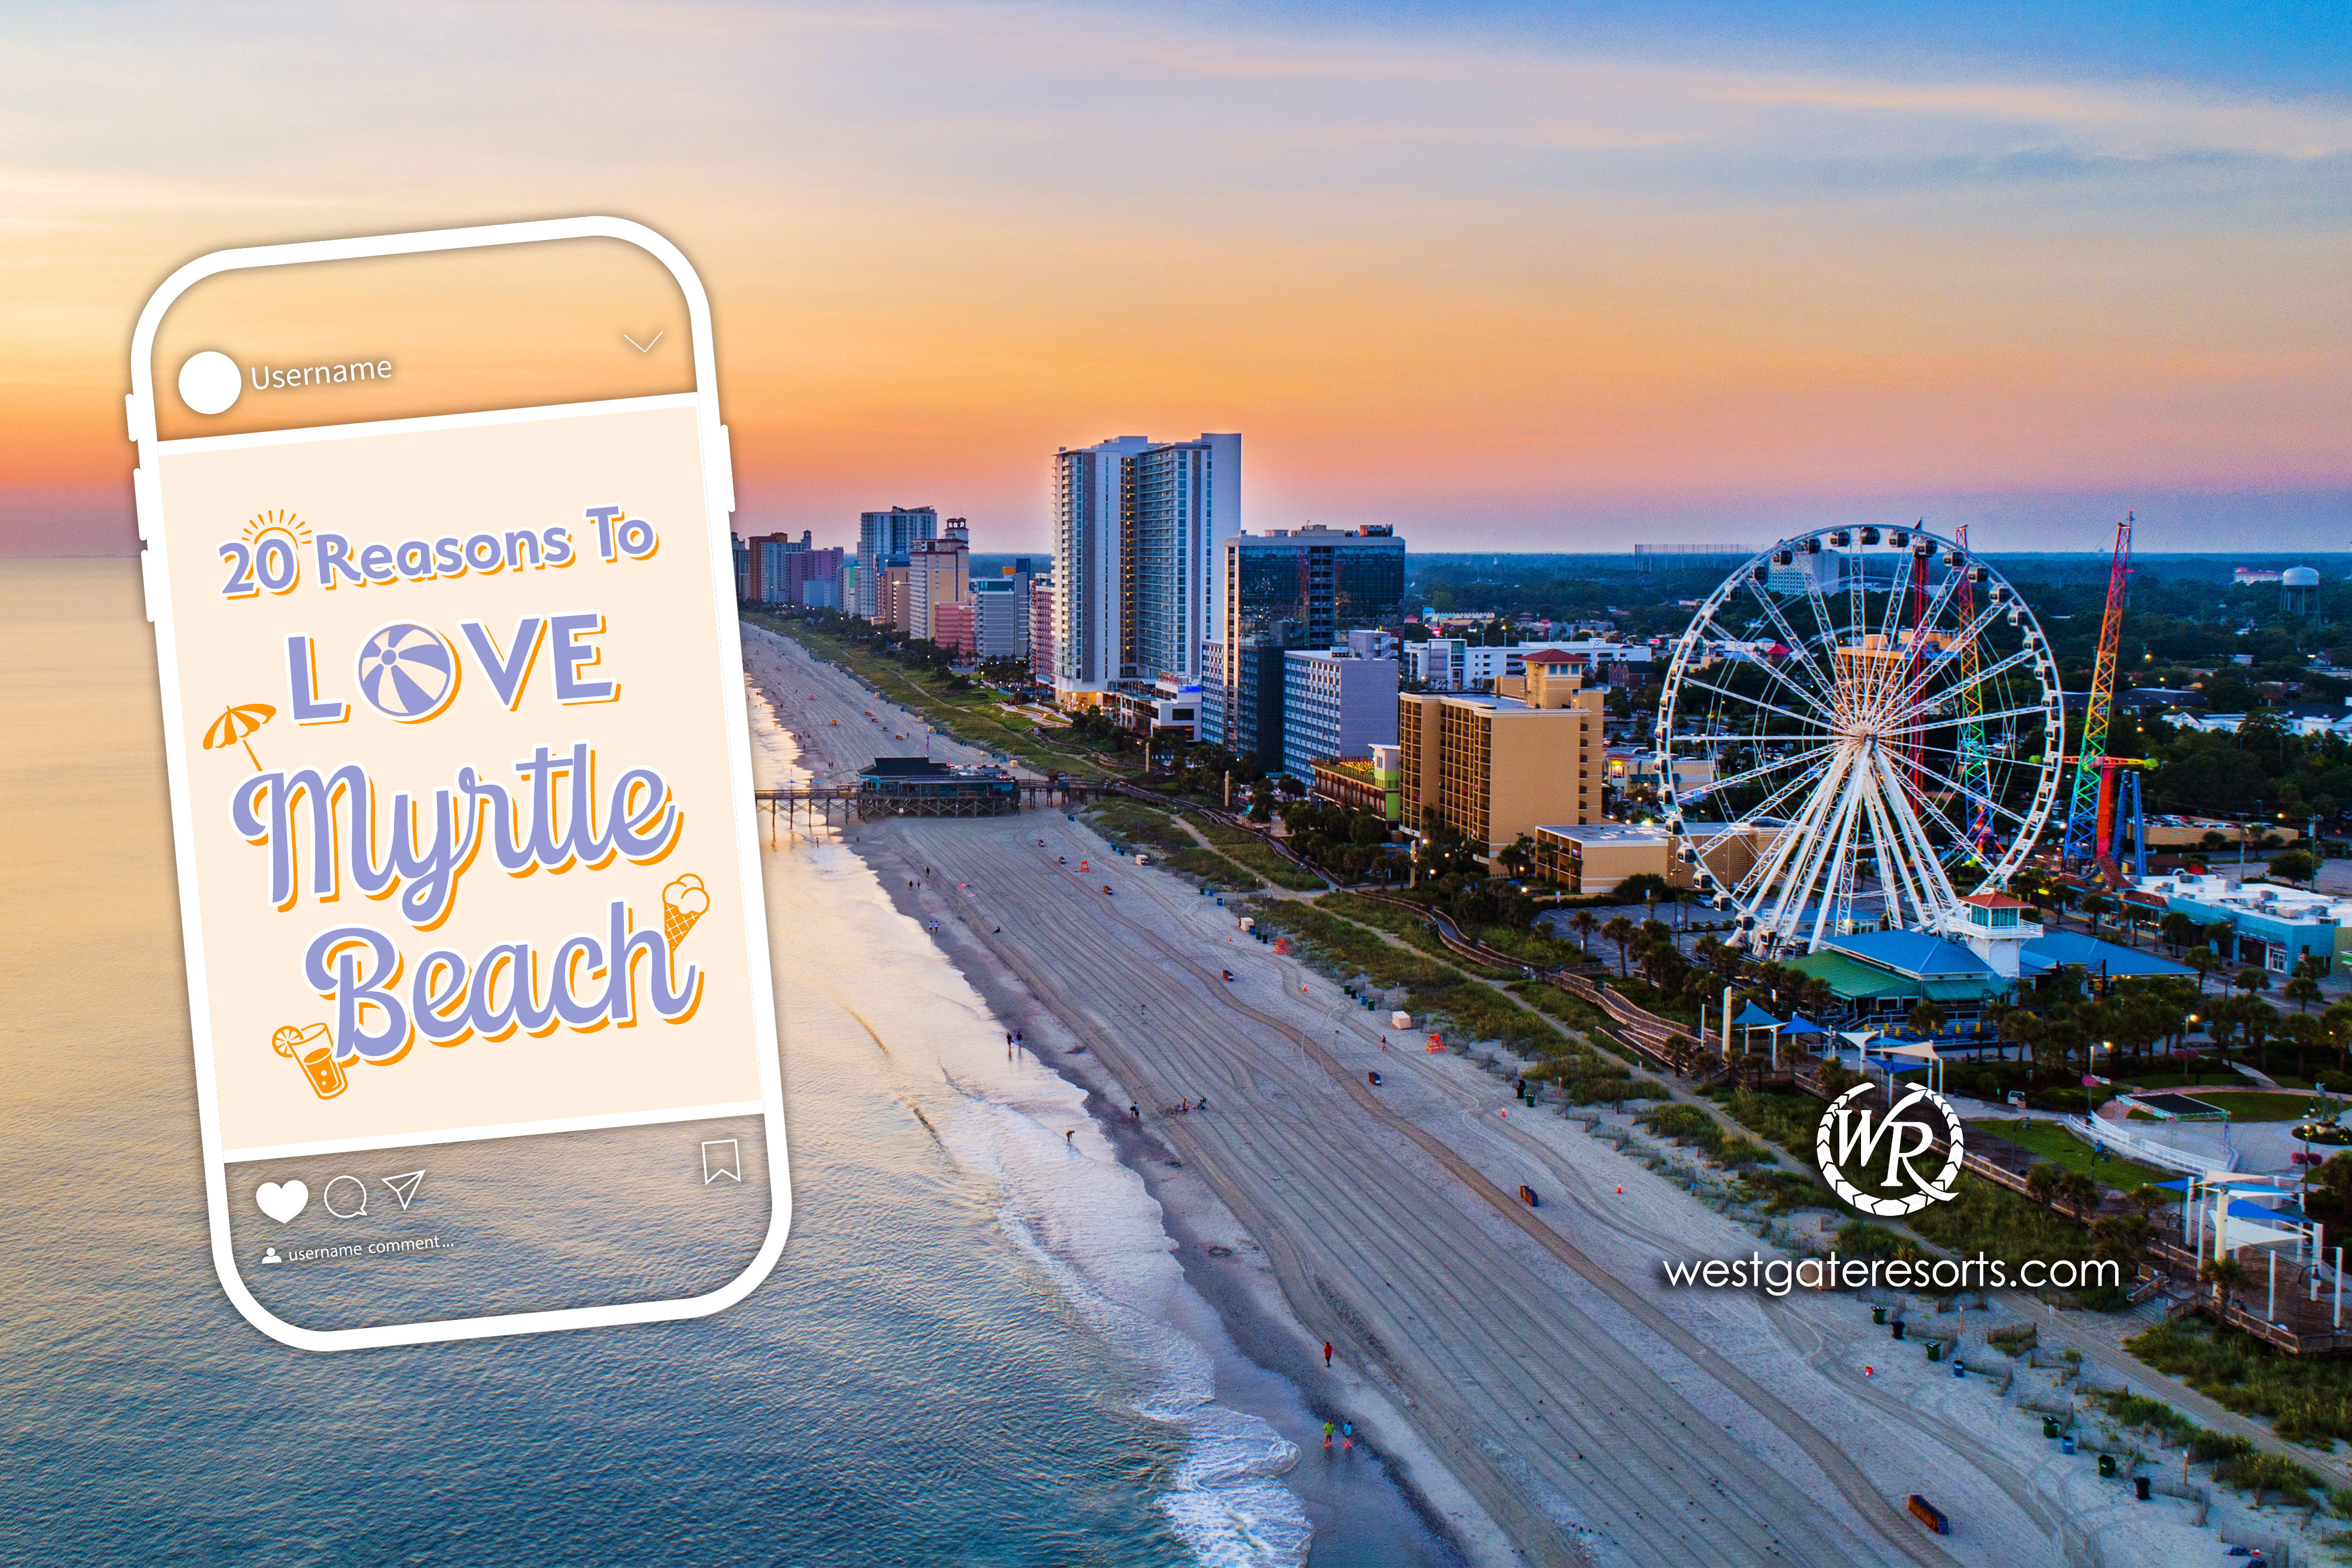 20 Reasons to Love Myrtle Beach